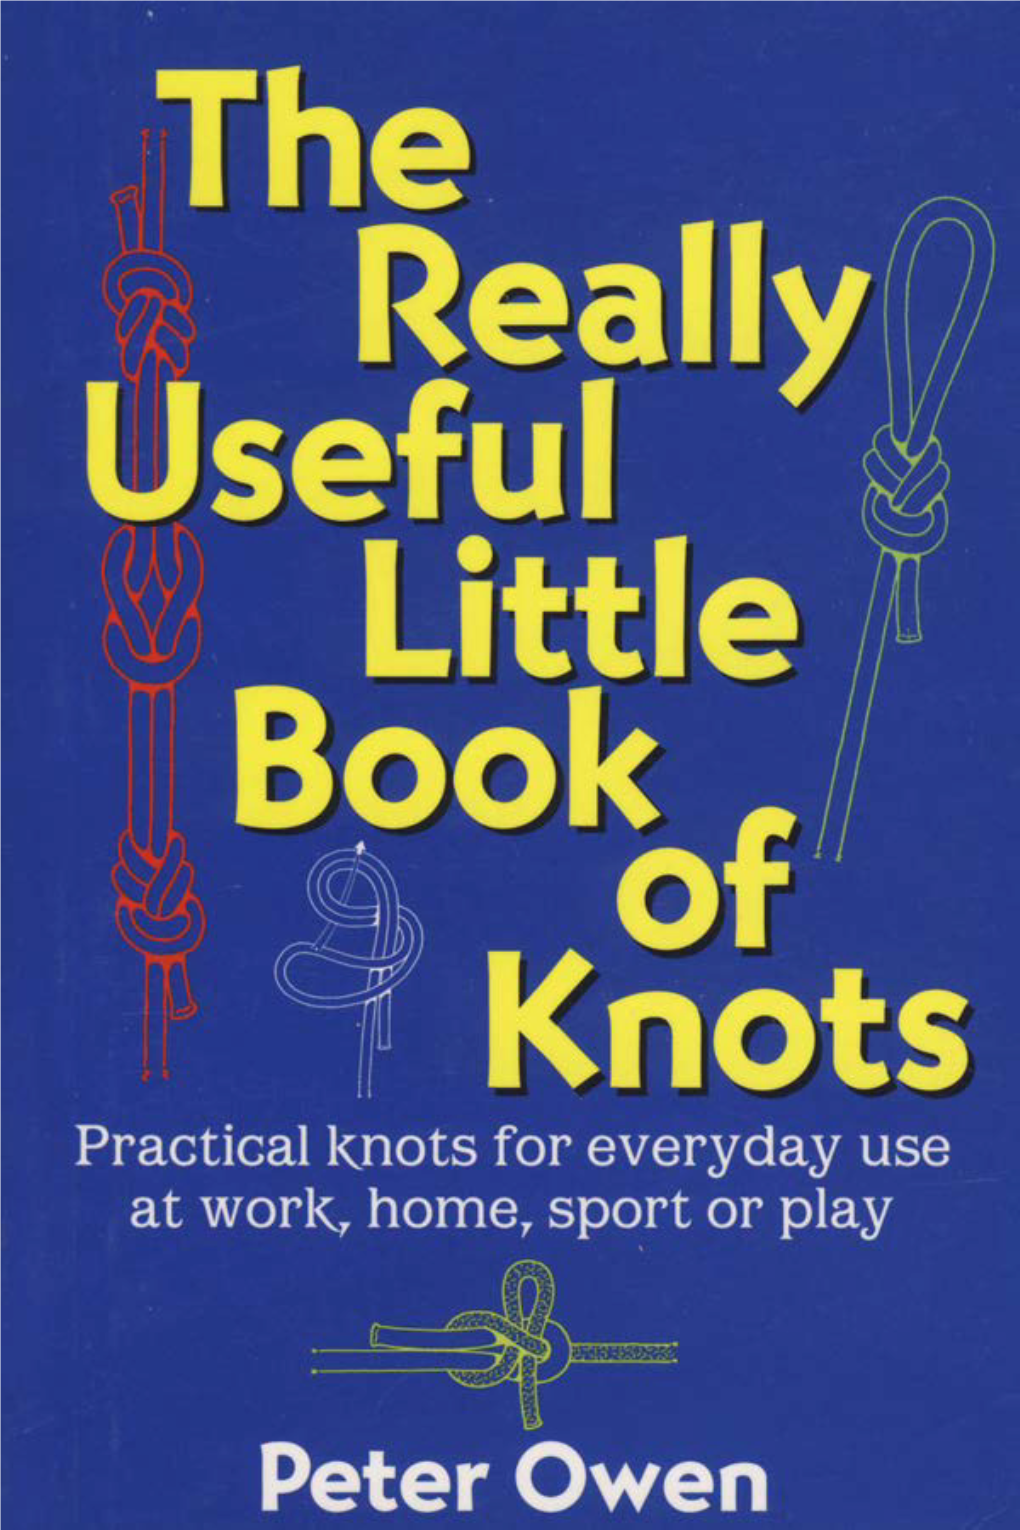 REALLY USEFUL LITTLE BOOK of KNOTS for Doris at Cottage Farm the REALLY USEFUL LITTLE BOOK of KNOTS